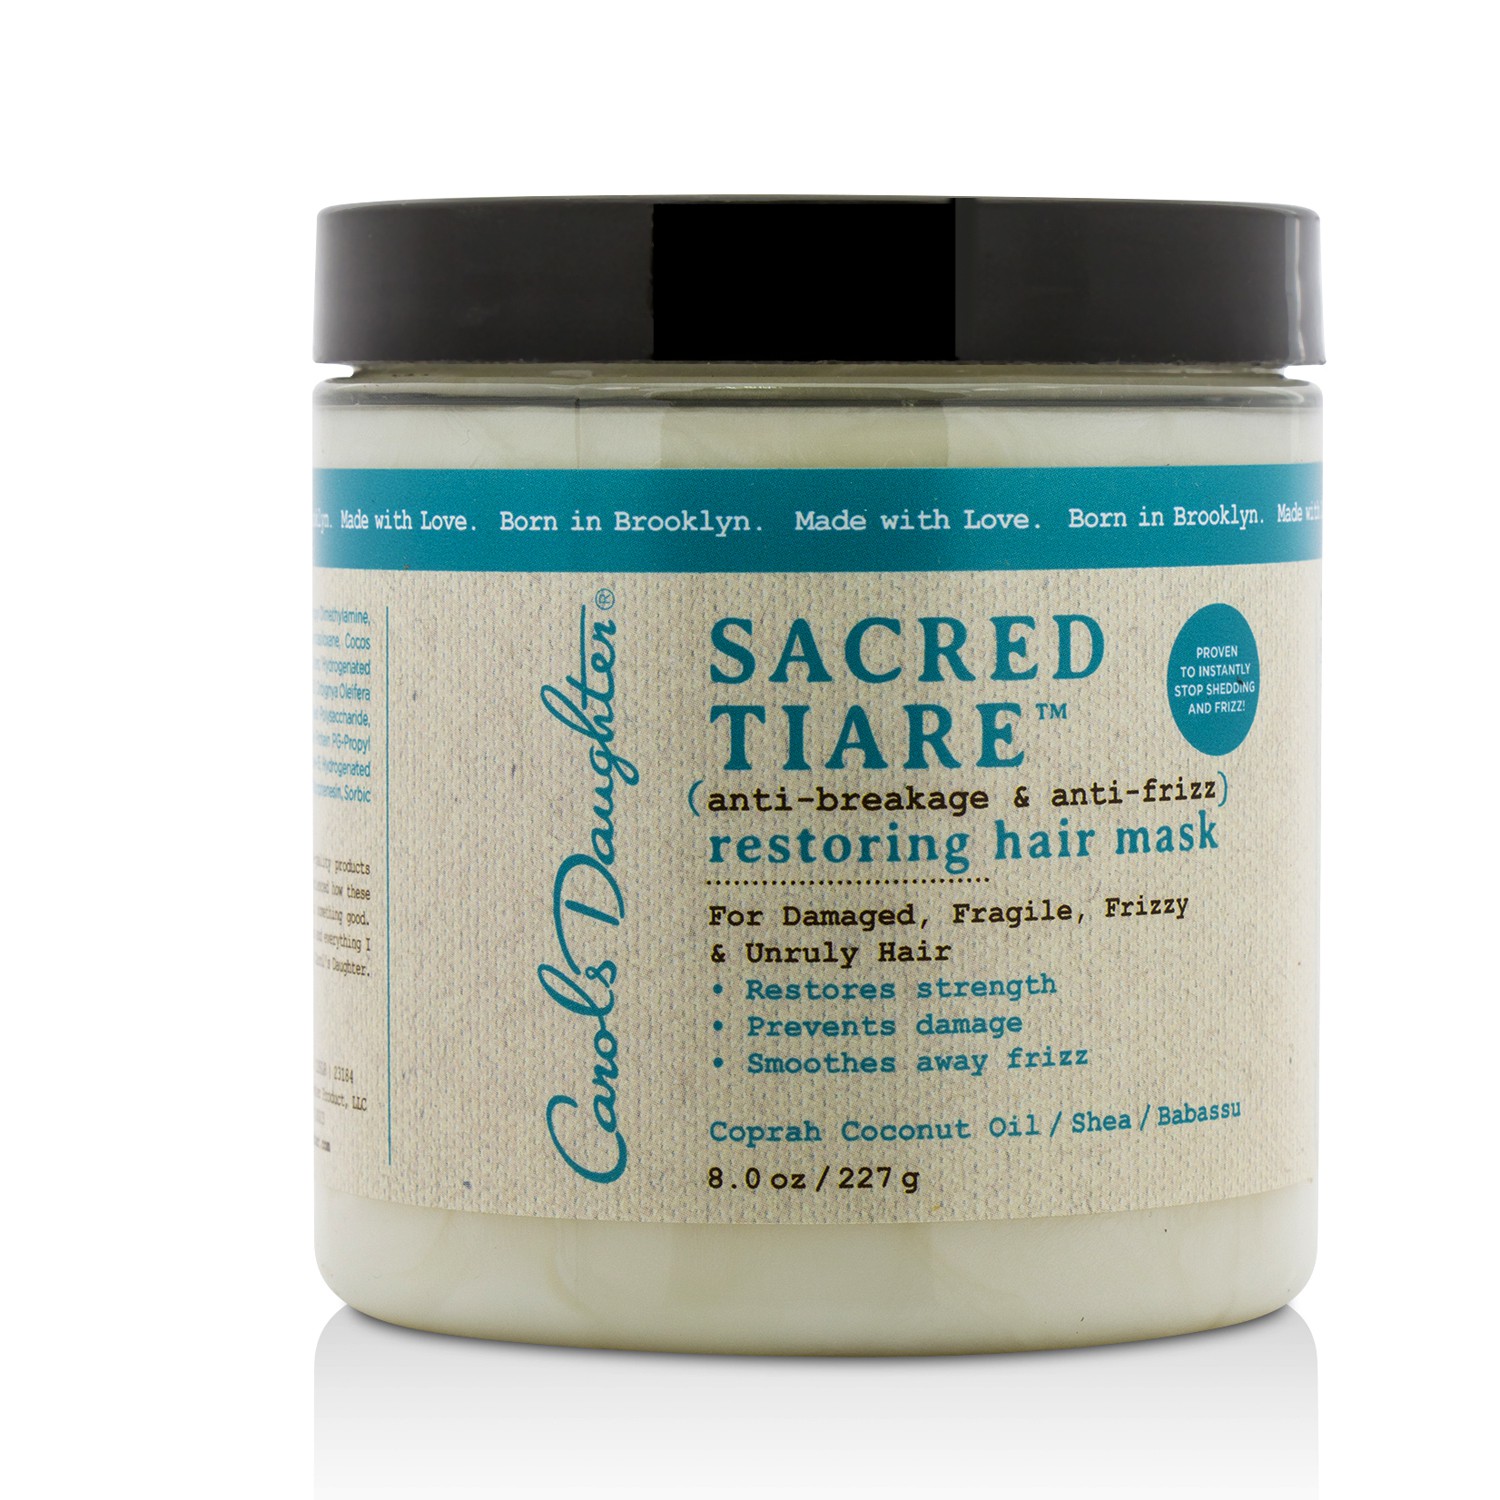 Sacred Tiare Anti-Breakage & Anti-Frizz Restoring Hair Mask (For Damaged Fragile Frizzy & Unruly Hair) Carols Daughter Image